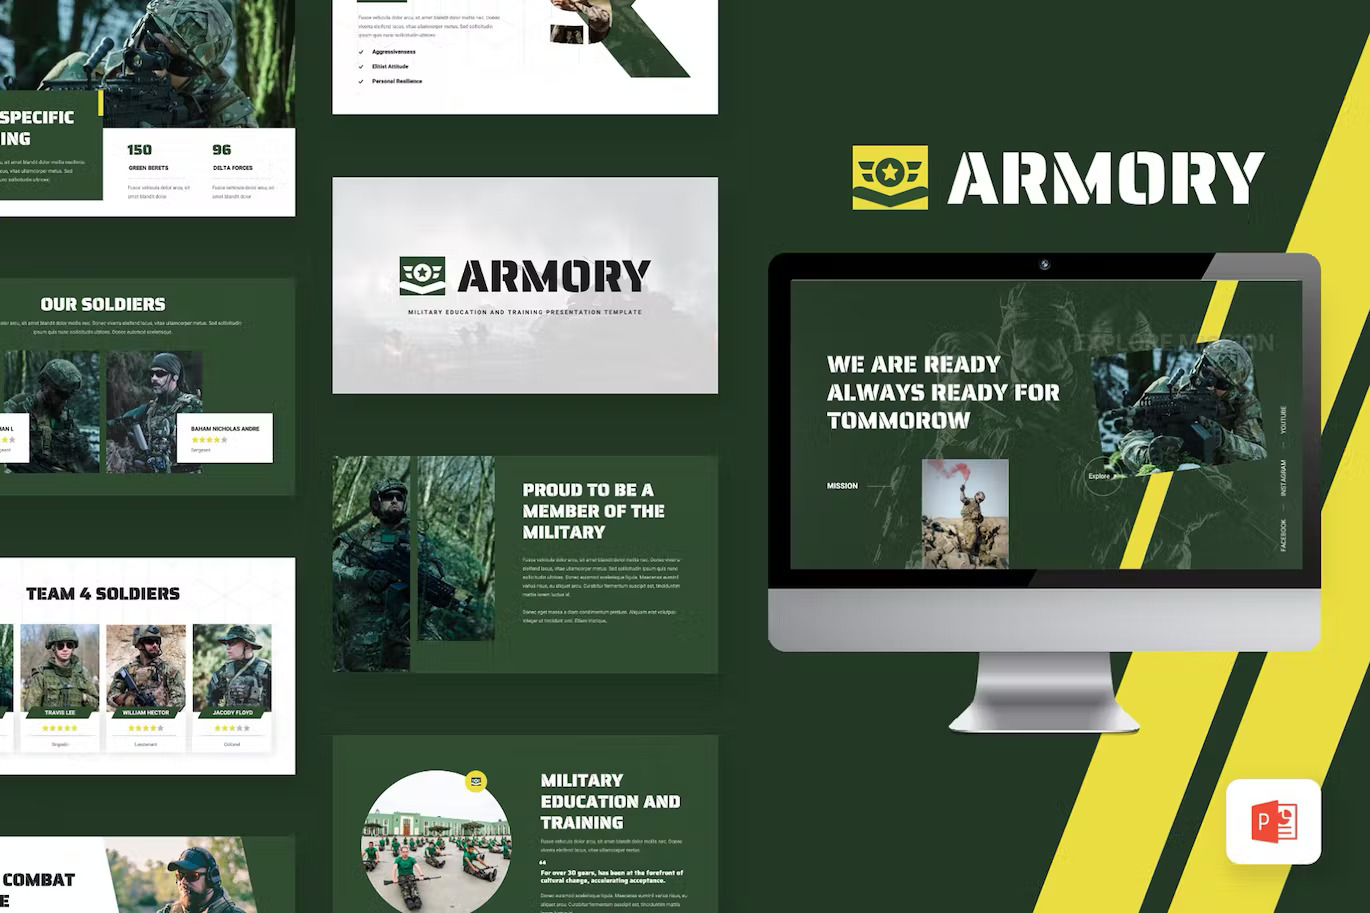 Mockup IMac with military images and white lettering "ARMORY" with different slides on a dark green background.